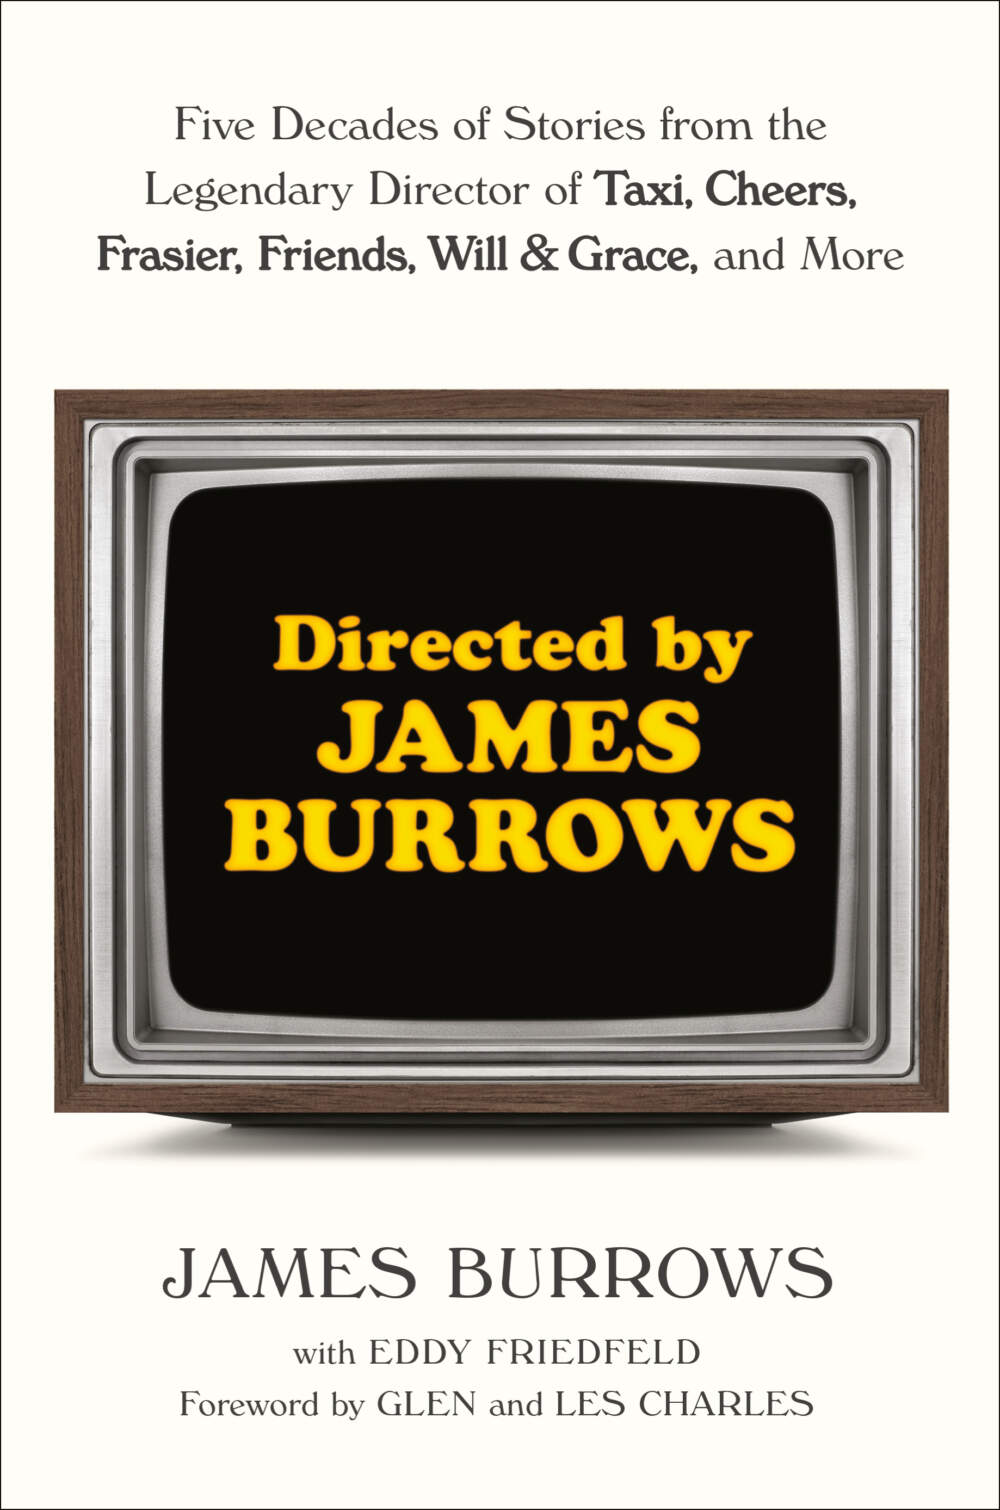 The cover of "Directed by James Burrows." (Courtesy)